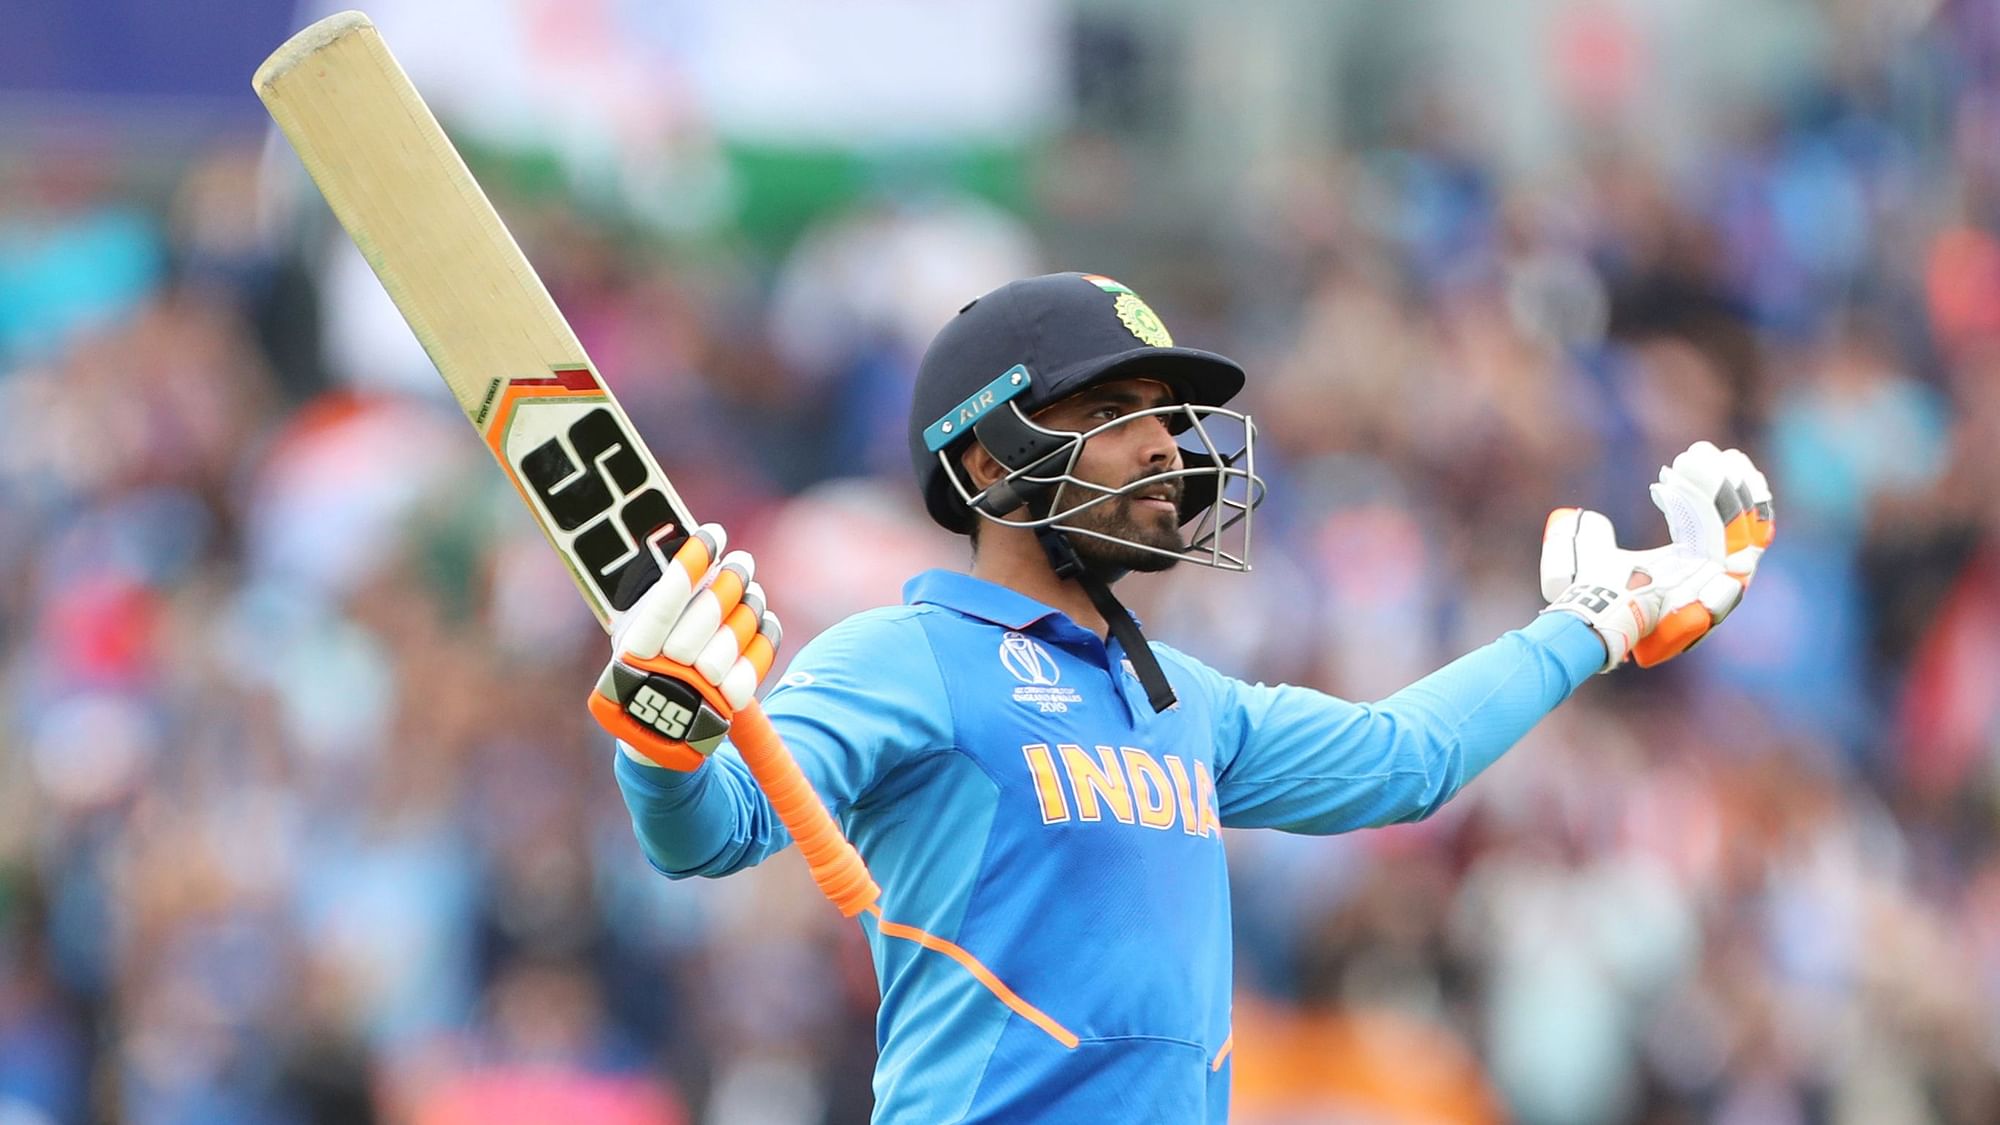 Ravindra Jadeja smashed a half-century off 39 balls to keep India alive in their run chase in the ICC World Cup semi-final against New Zealand.